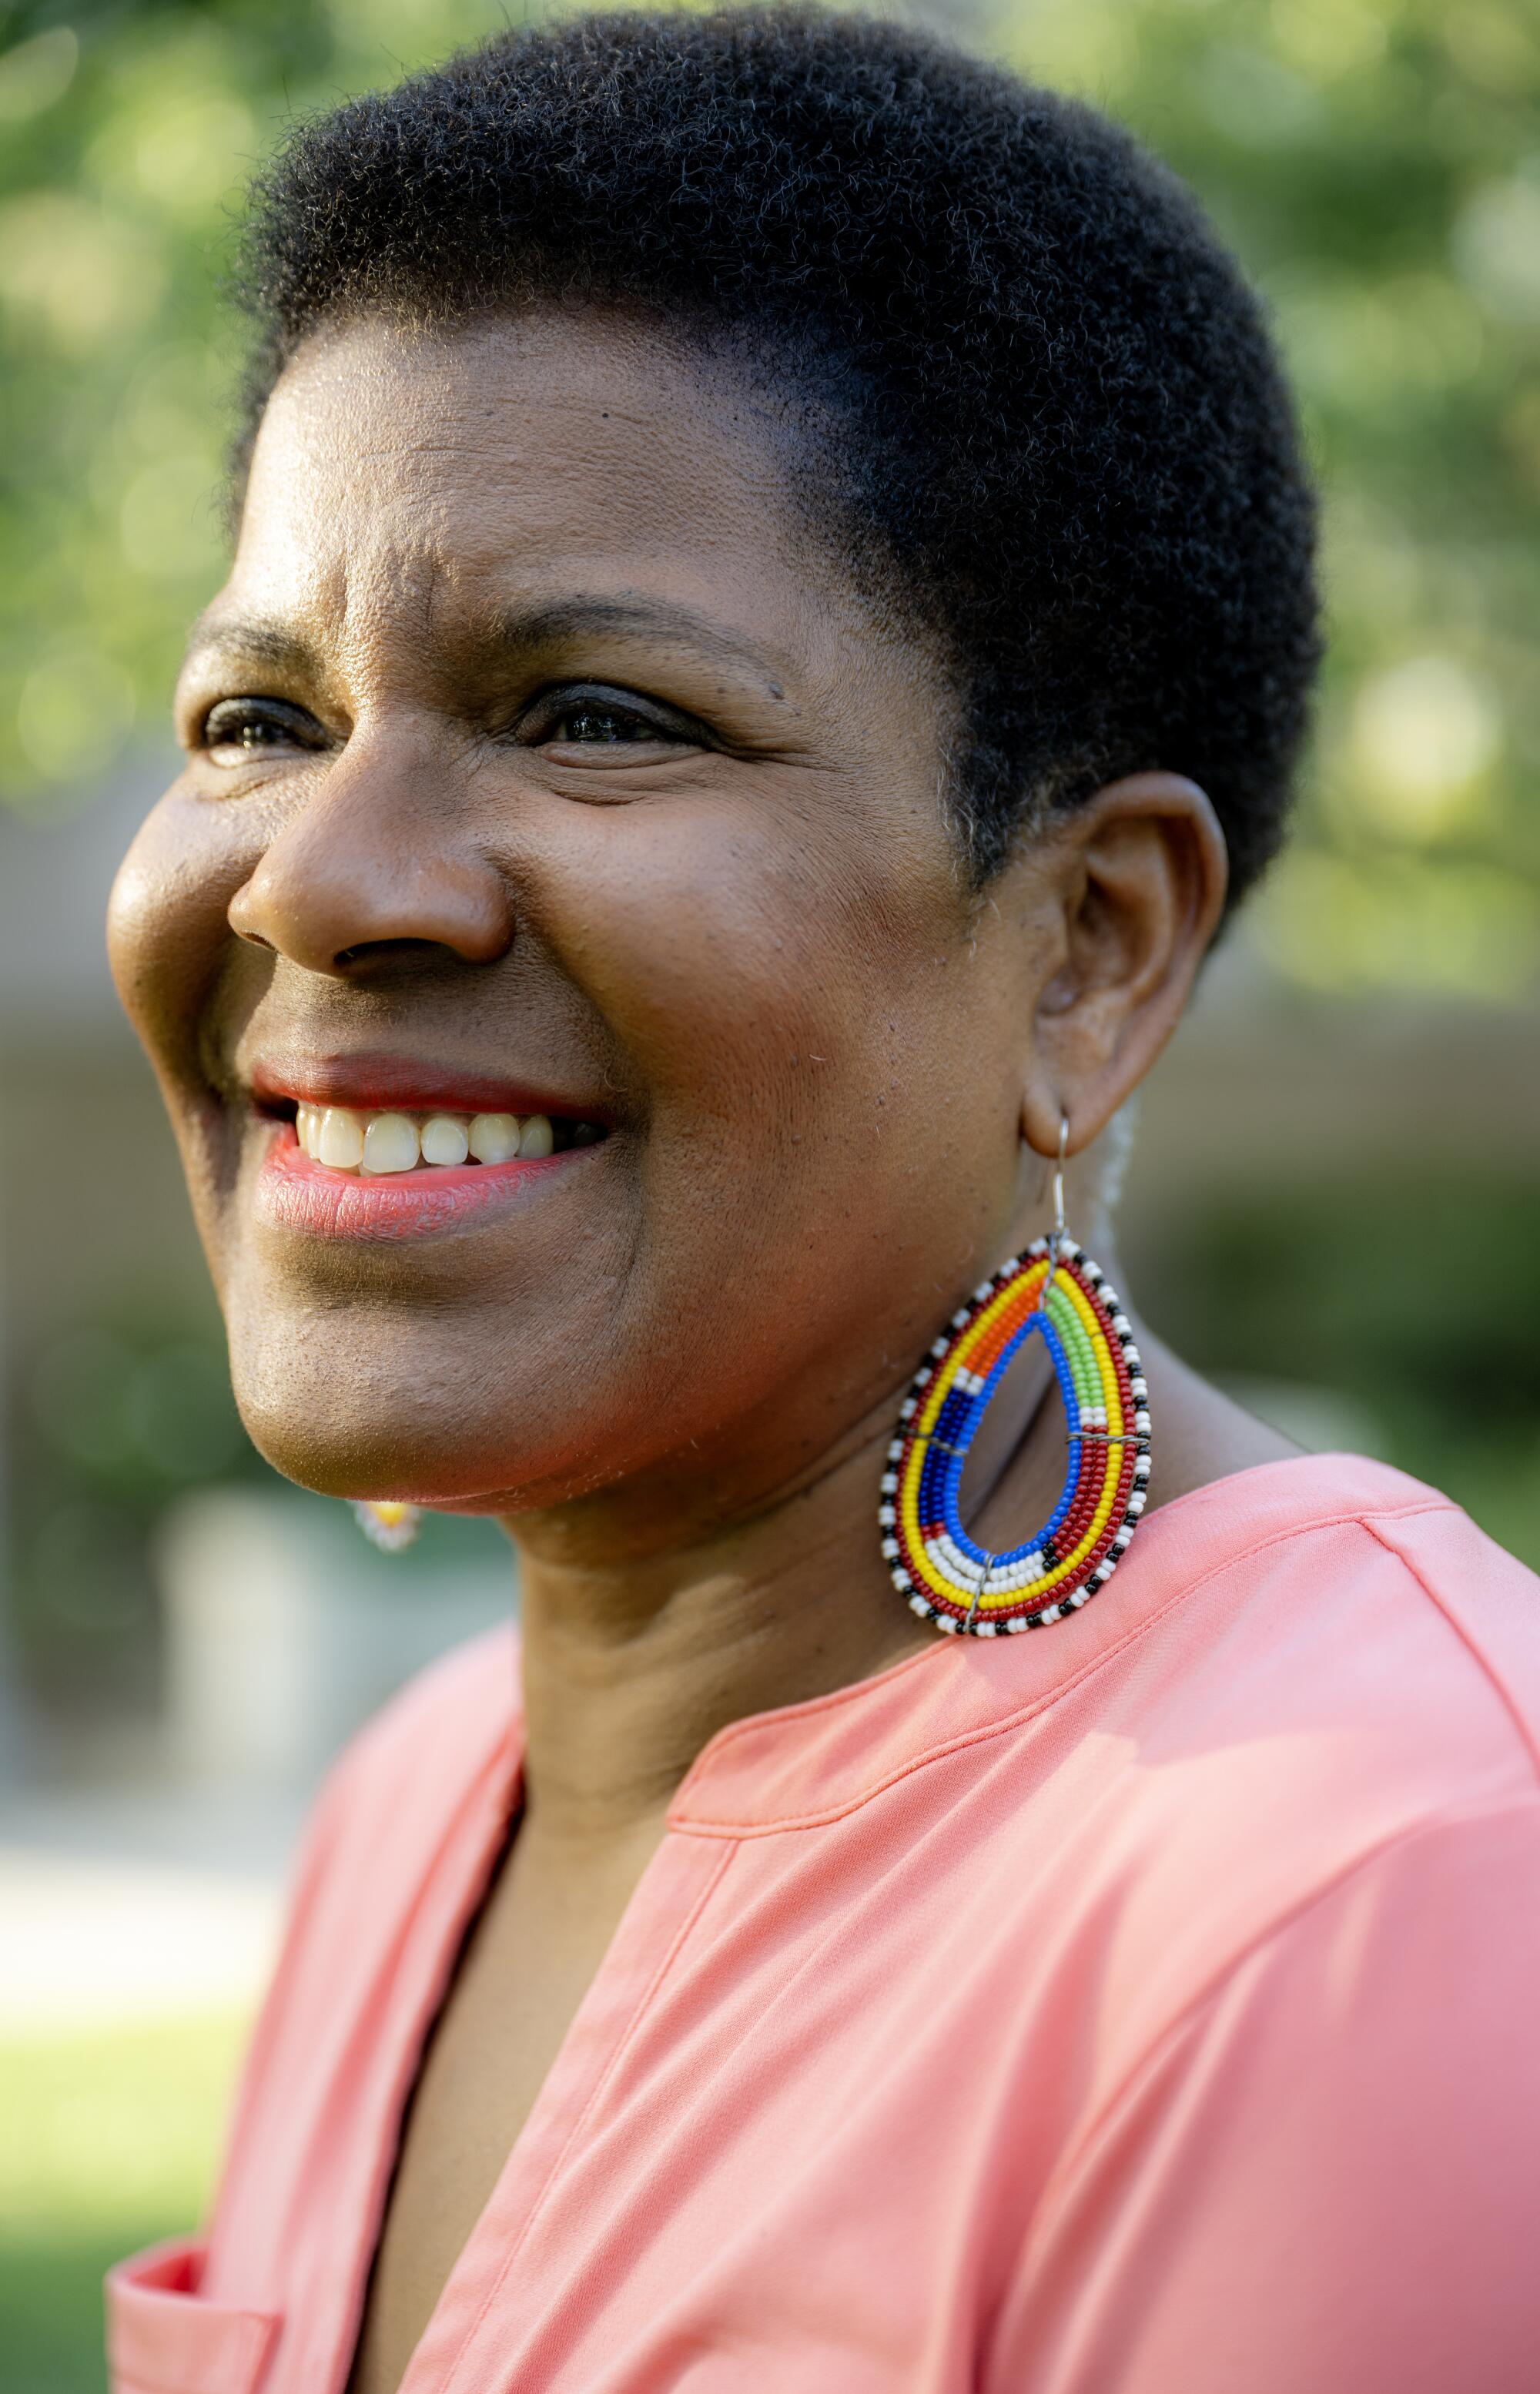 A smiling woman in a pink shirt with big teardrop earrings.